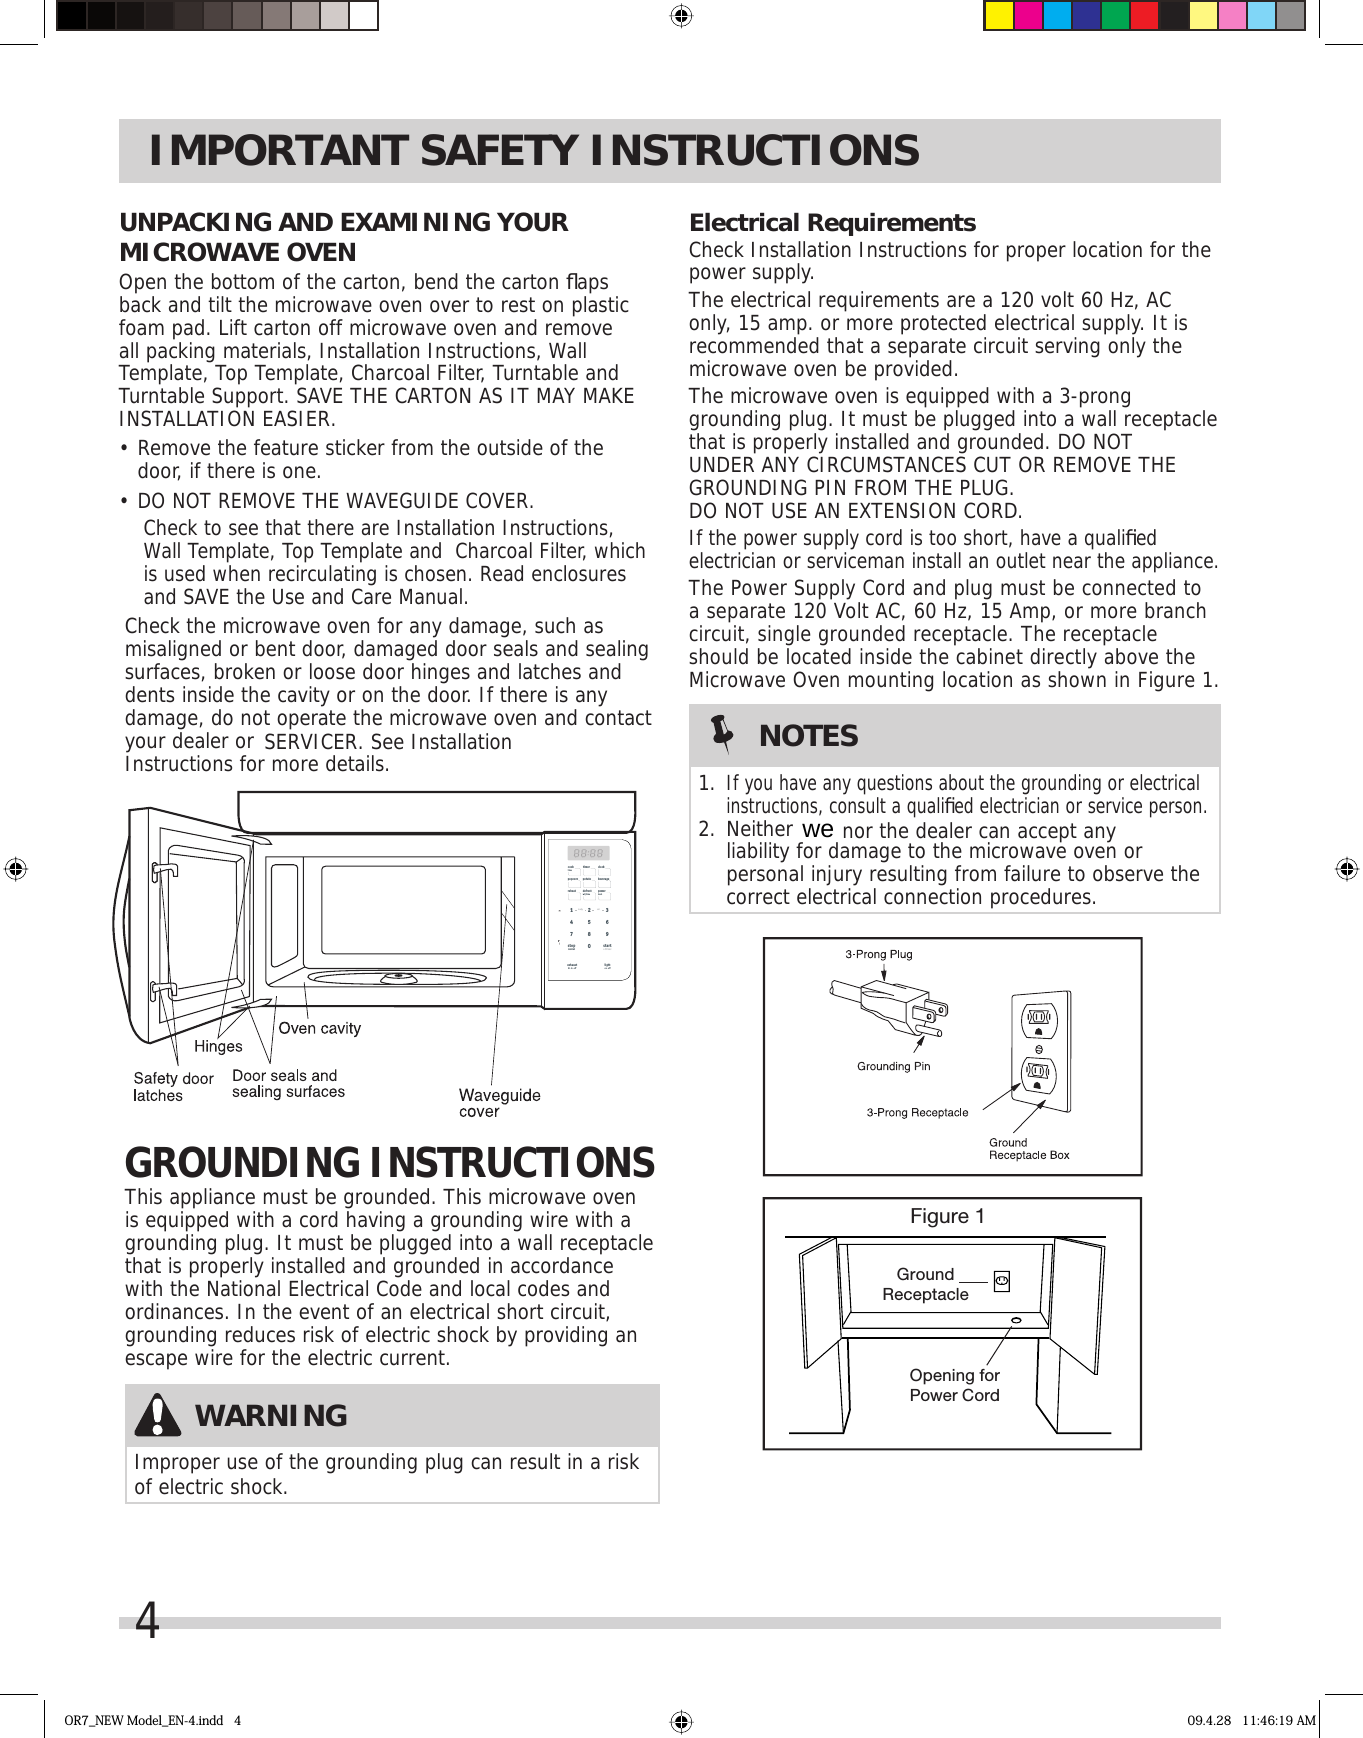 4IMPORTANT SAFETY INSTRUCTIONSElectrical RequirementsCheck Installation Instructions for proper location for the power supply.The electrical requirements are a 120 volt 60 Hz, AC only, 15 amp. or more protected electrical supply. It is recommended that a separate circuit serving only the microwave oven be provided.The microwave oven is equipped with a 3-prong grounding plug. It must be plugged into a wall receptacle that is properly installed and grounded. DO NOT UNDER ANY CIRCUMSTANCES CUT OR REMOVE THE GROUNDING PIN FROM THE PLUG. DO NOT USE AN EXTENSION CORD.If the power supply cord is too short, have a qualiﬁ ed electrician or serviceman install an outlet near the appliance.The Power Supply Cord and plug must be connected to a separate 120 Volt AC, 60 Hz, 15 Amp, or more branch circuit, single grounded receptacle. The receptacle should be located inside the cabinet directly above the Microwave Oven mounting location as shown in Figure 1.Figure 1GroundReceptacleOpening forPower CordWARNINGImproper use of the grounding plug can result in a risk of electric shock.NOTES1. If you have any questions about the grounding or electrical instructions, consult a qualiﬁ ed electrician or service person.2. Neither  nor the dealer can accept any liability for damage to the microwave oven or personal injury resulting from failure to observe the correct electrical connection procedures.GROUNDING INSTRUCTIONSThis appliance must be grounded. This microwave oven is equipped with a cord having a grounding wire with a grounding plug. It must be plugged into a wall receptacle that is properly installed and grounded in accordance with the National Electrical Code and local codes and ordinances. In the event of an electrical short circuit, grounding reduces risk of electric shock by providing an escape wire for the electric current.UNPACKING AND EXAMINING YOUR MICROWAVE OVENOpen the bottom of the carton, bend the carton ﬂ aps back and tilt the microwave oven over to rest on plastic foam pad. Lift carton off microwave oven and remove all packing materials, Installation Instructions, Wall Template, Top Template, Charcoal Filter, Turntable and Turntable Support. SAVE THE CARTON AS IT MAY MAKE INSTALLATION EASIER.•  Remove the feature sticker from the outside of the door, if there is one.•  DO NOT REMOVE THE WAVEGUIDE COVER.Check to see that there are Installation Instructions, Wall Template, Top Template and  Charcoal Filter, which is used when recirculating is chosen. Read enclosures and SAVE the Use and Care Manual.Check the microwave oven for any damage, such as misaligned or bent door, damaged door seals and sealing surfaces, broken or loose door hinges and latches and dents inside the cavity or on the door. If there is any damage, do not operate the microwave oven and contact your dealer or SERVICER. See Installation Instructions for more details.OR7_NEW Model_EN-4.indd   4 09.4.28   11:46:19 AMstartstopcancelexhausthi·lo·offlighton·offclockpopcorn potato beveragereheat defrostwt/timepowerlevel+ 30 sectimercooktimeready set0132987654we